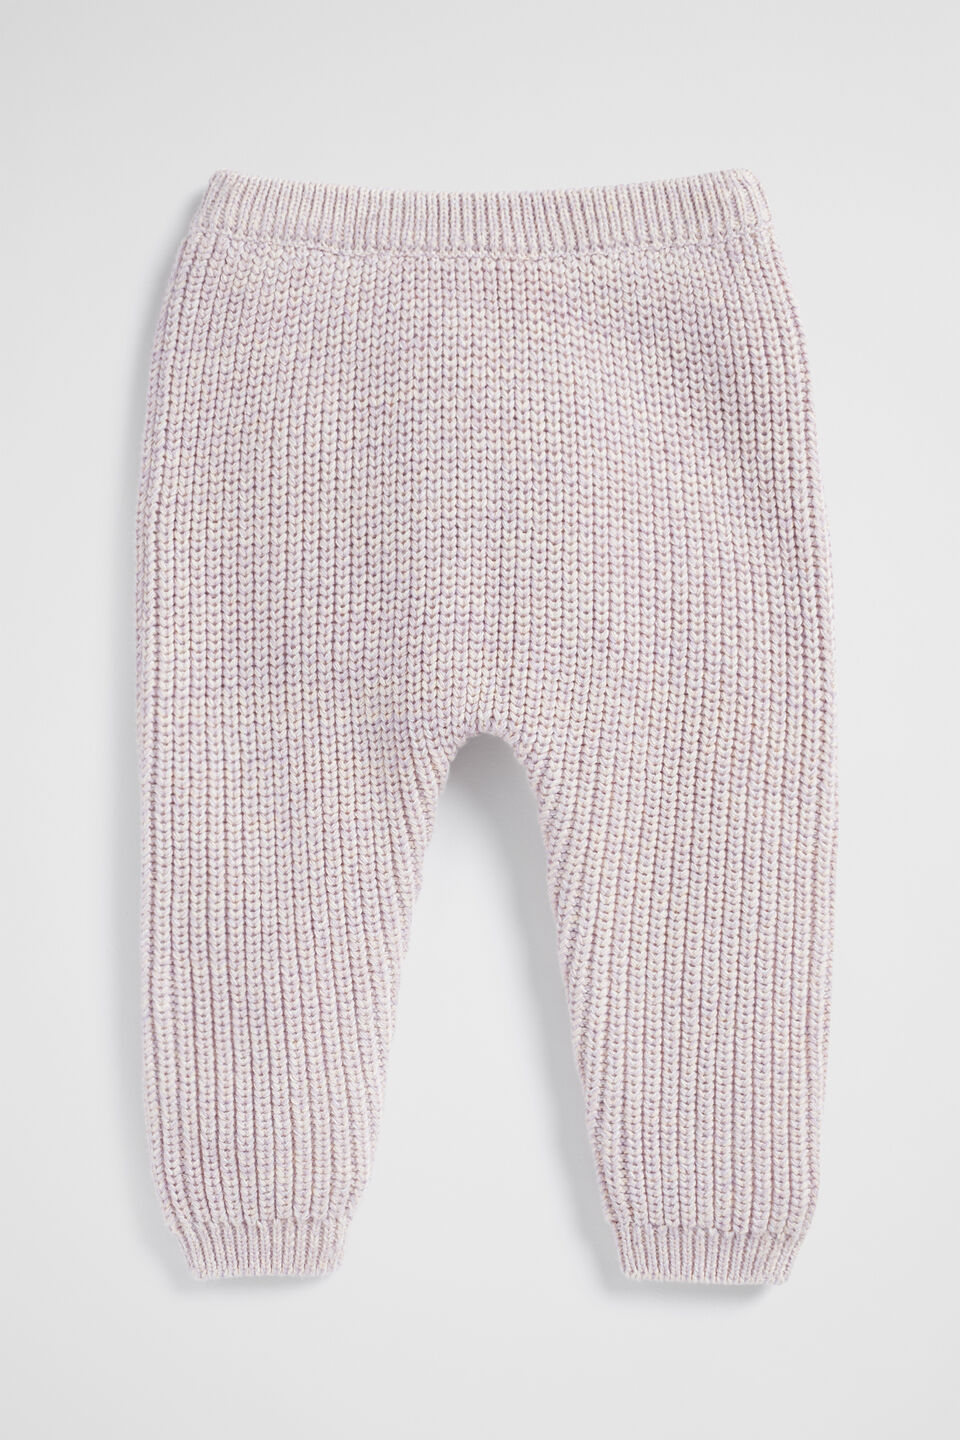 Mixy Knit Legging  Pale Orchid